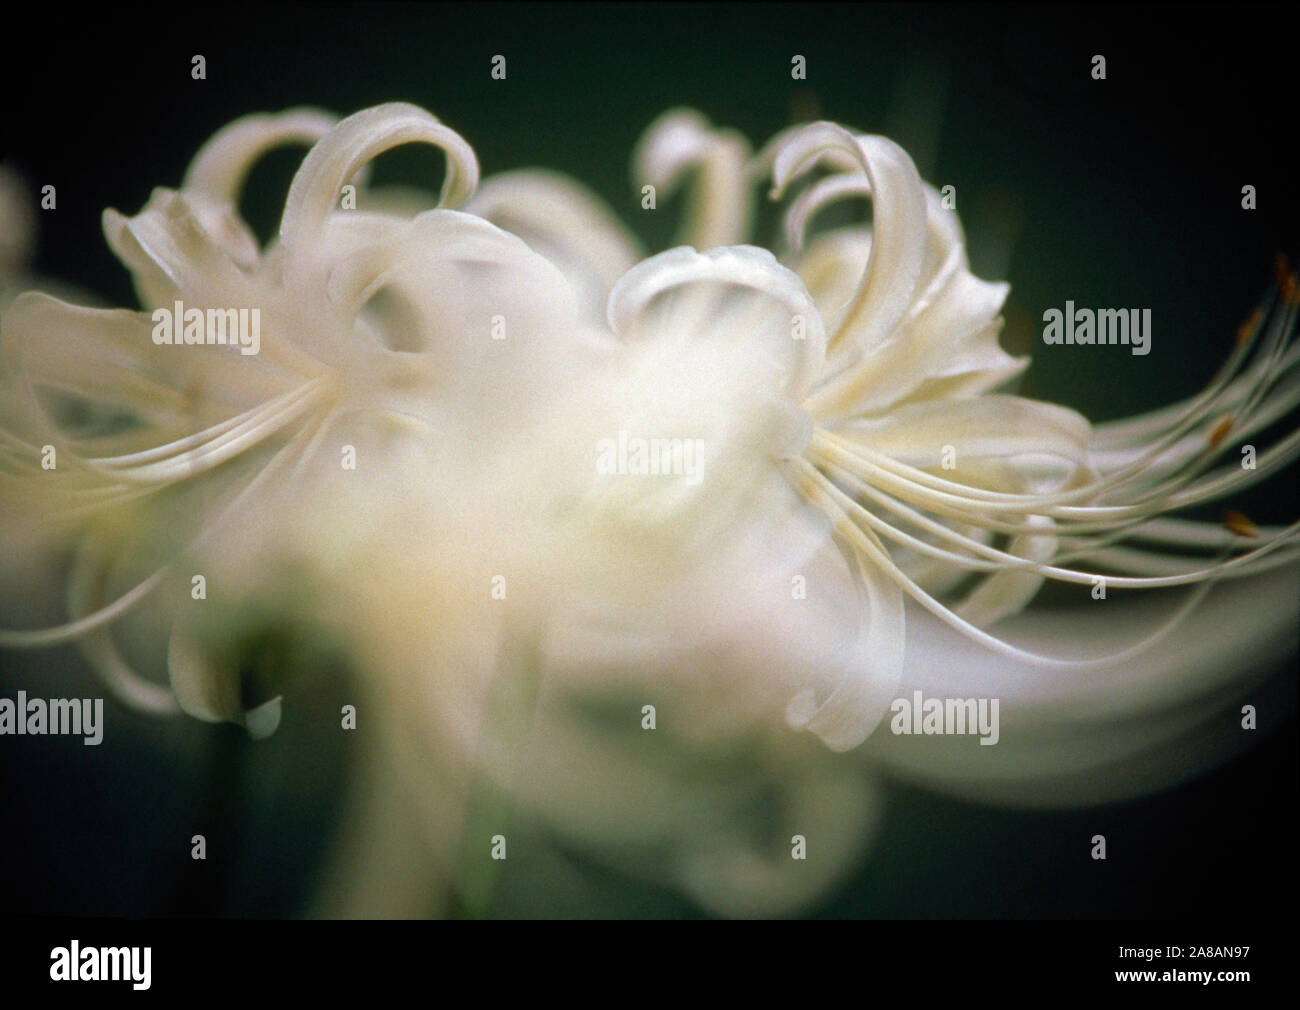 Extreme close-up of delicate white flower with stamen Stock Photo